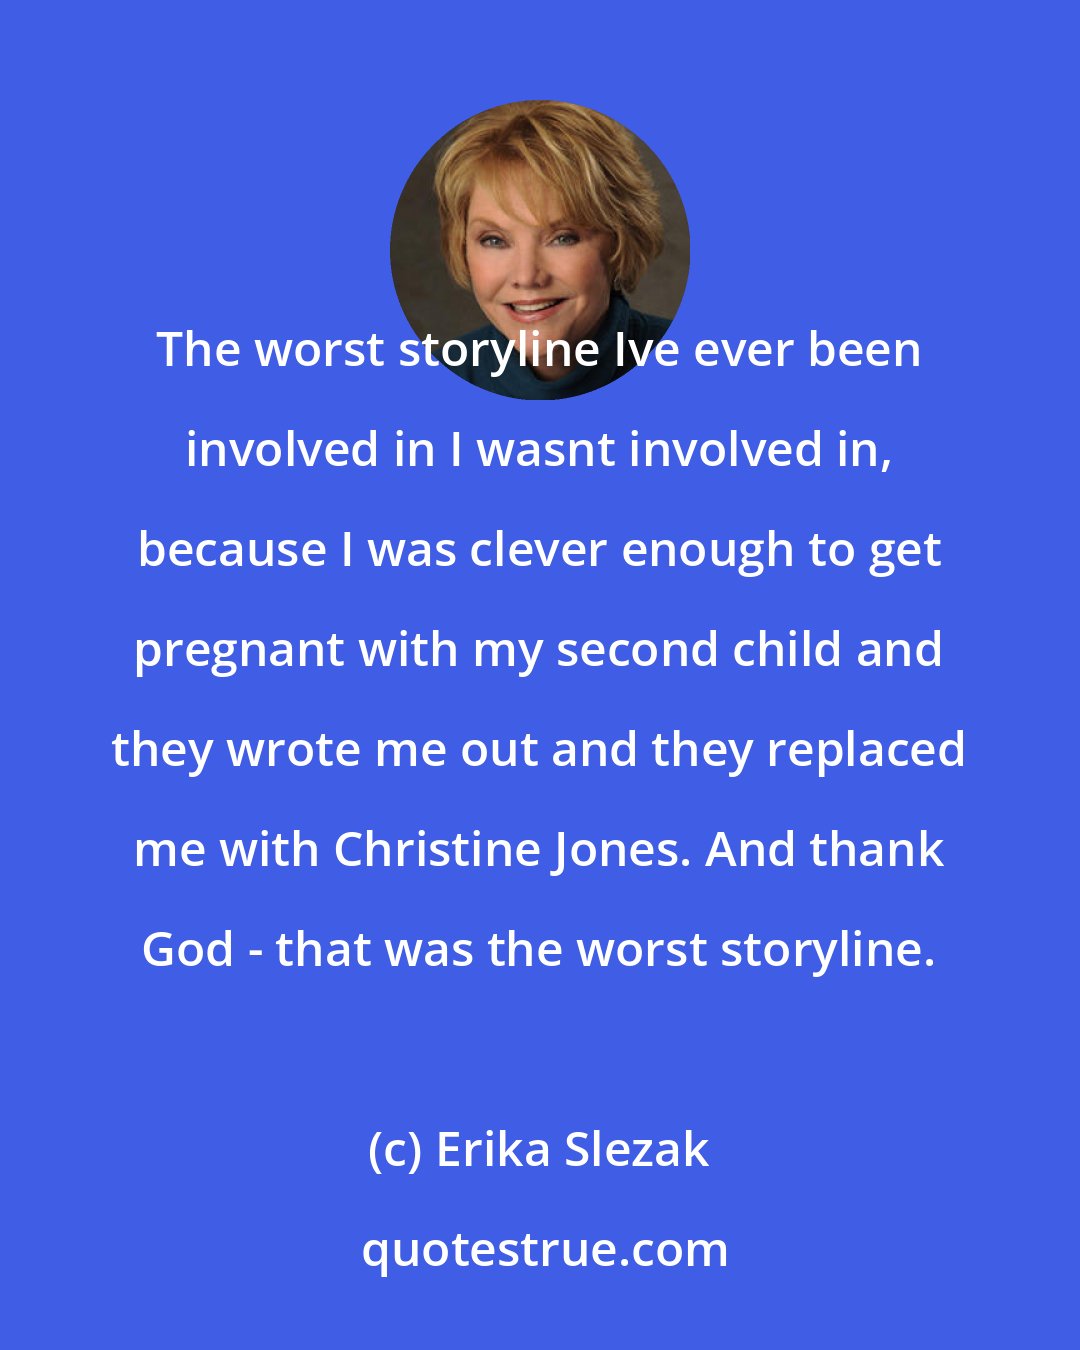 Erika Slezak: The worst storyline Ive ever been involved in I wasnt involved in, because I was clever enough to get pregnant with my second child and they wrote me out and they replaced me with Christine Jones. And thank God - that was the worst storyline.